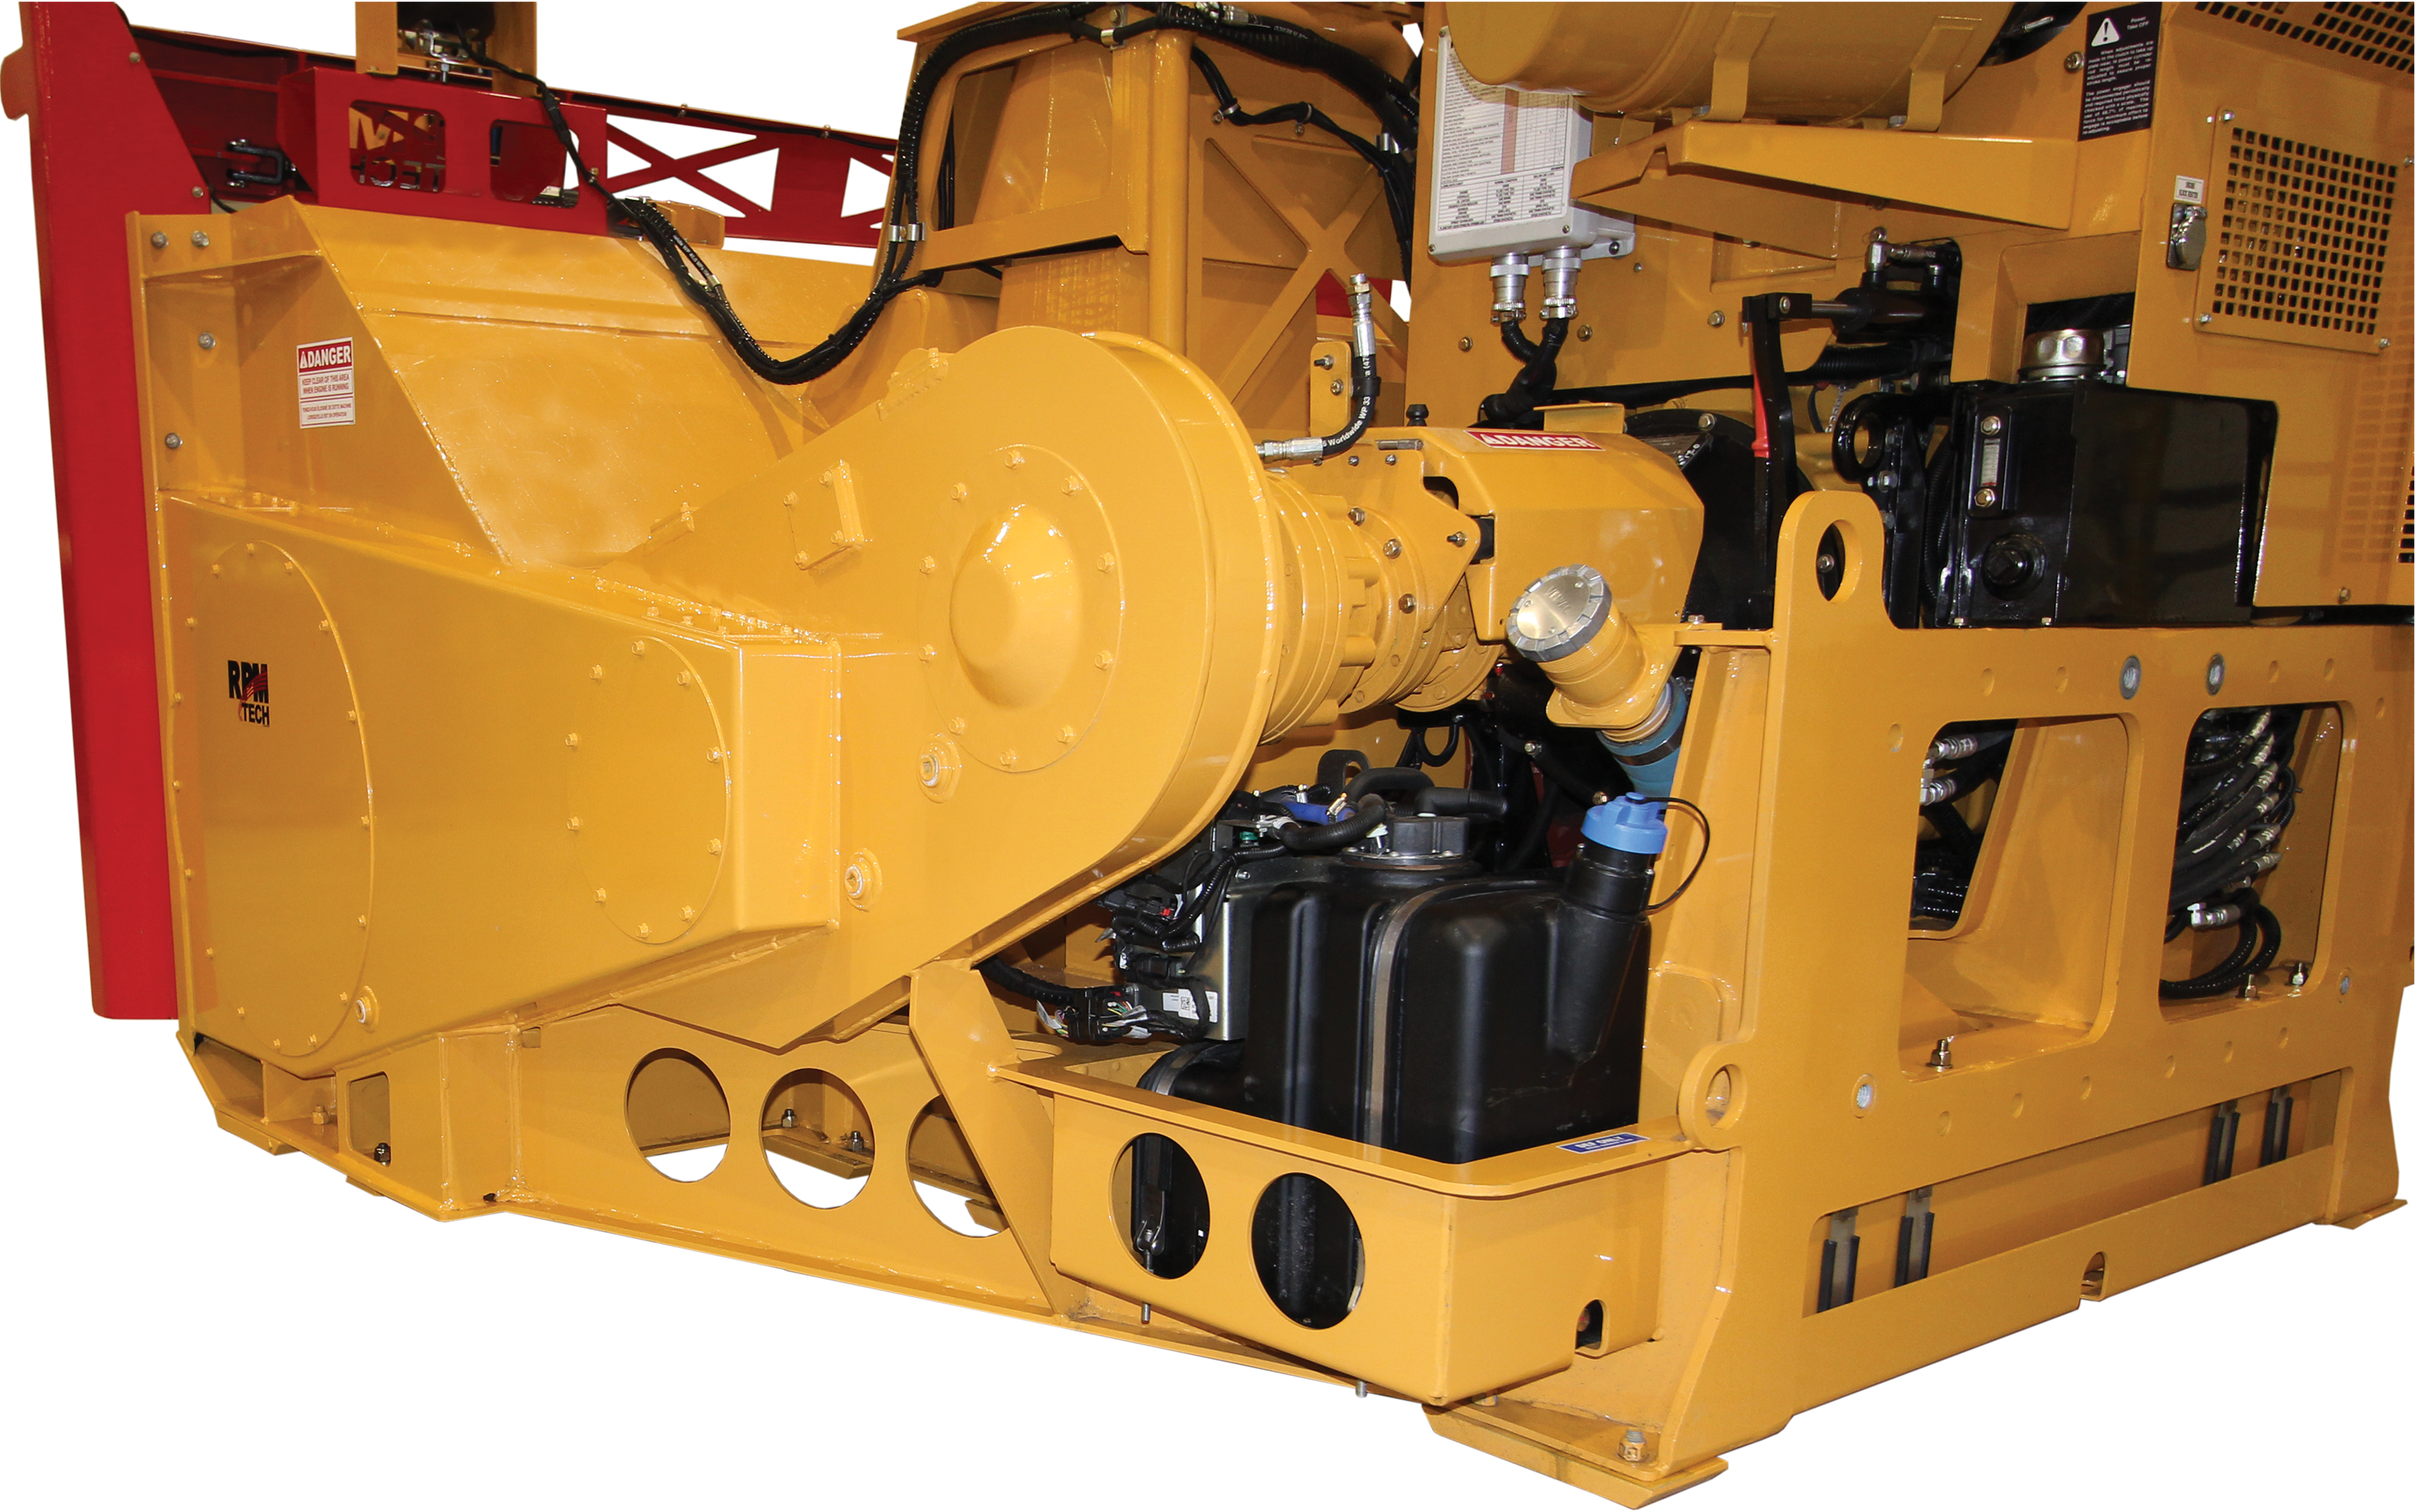 Rugged frame of the RPM40R loader-mounted snow blower